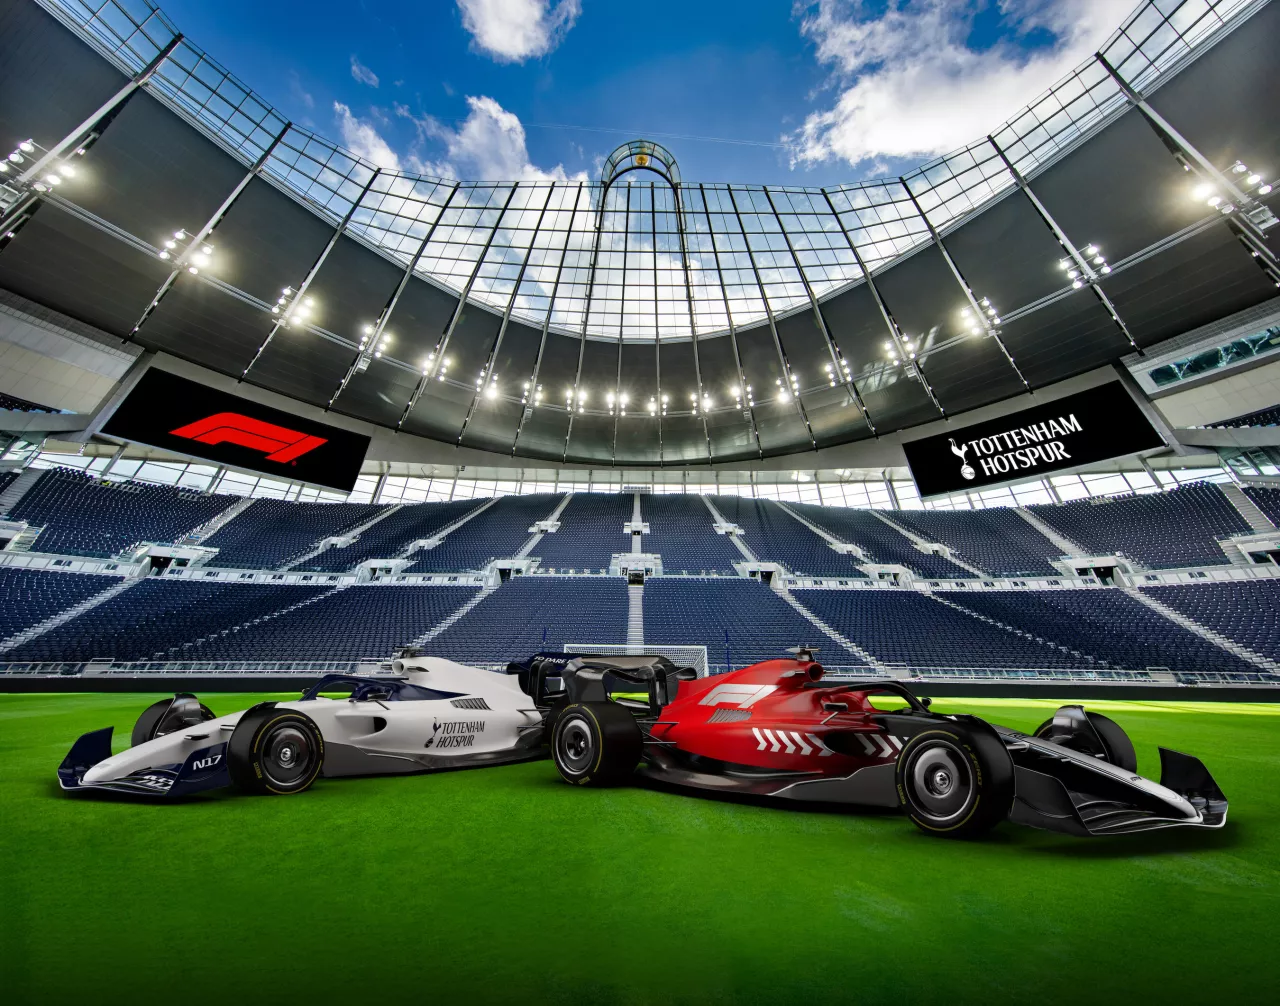 The world’s first in-stadium karting facility and London’s longest indoor electric go kart track to open in Autumn 2023 img#1